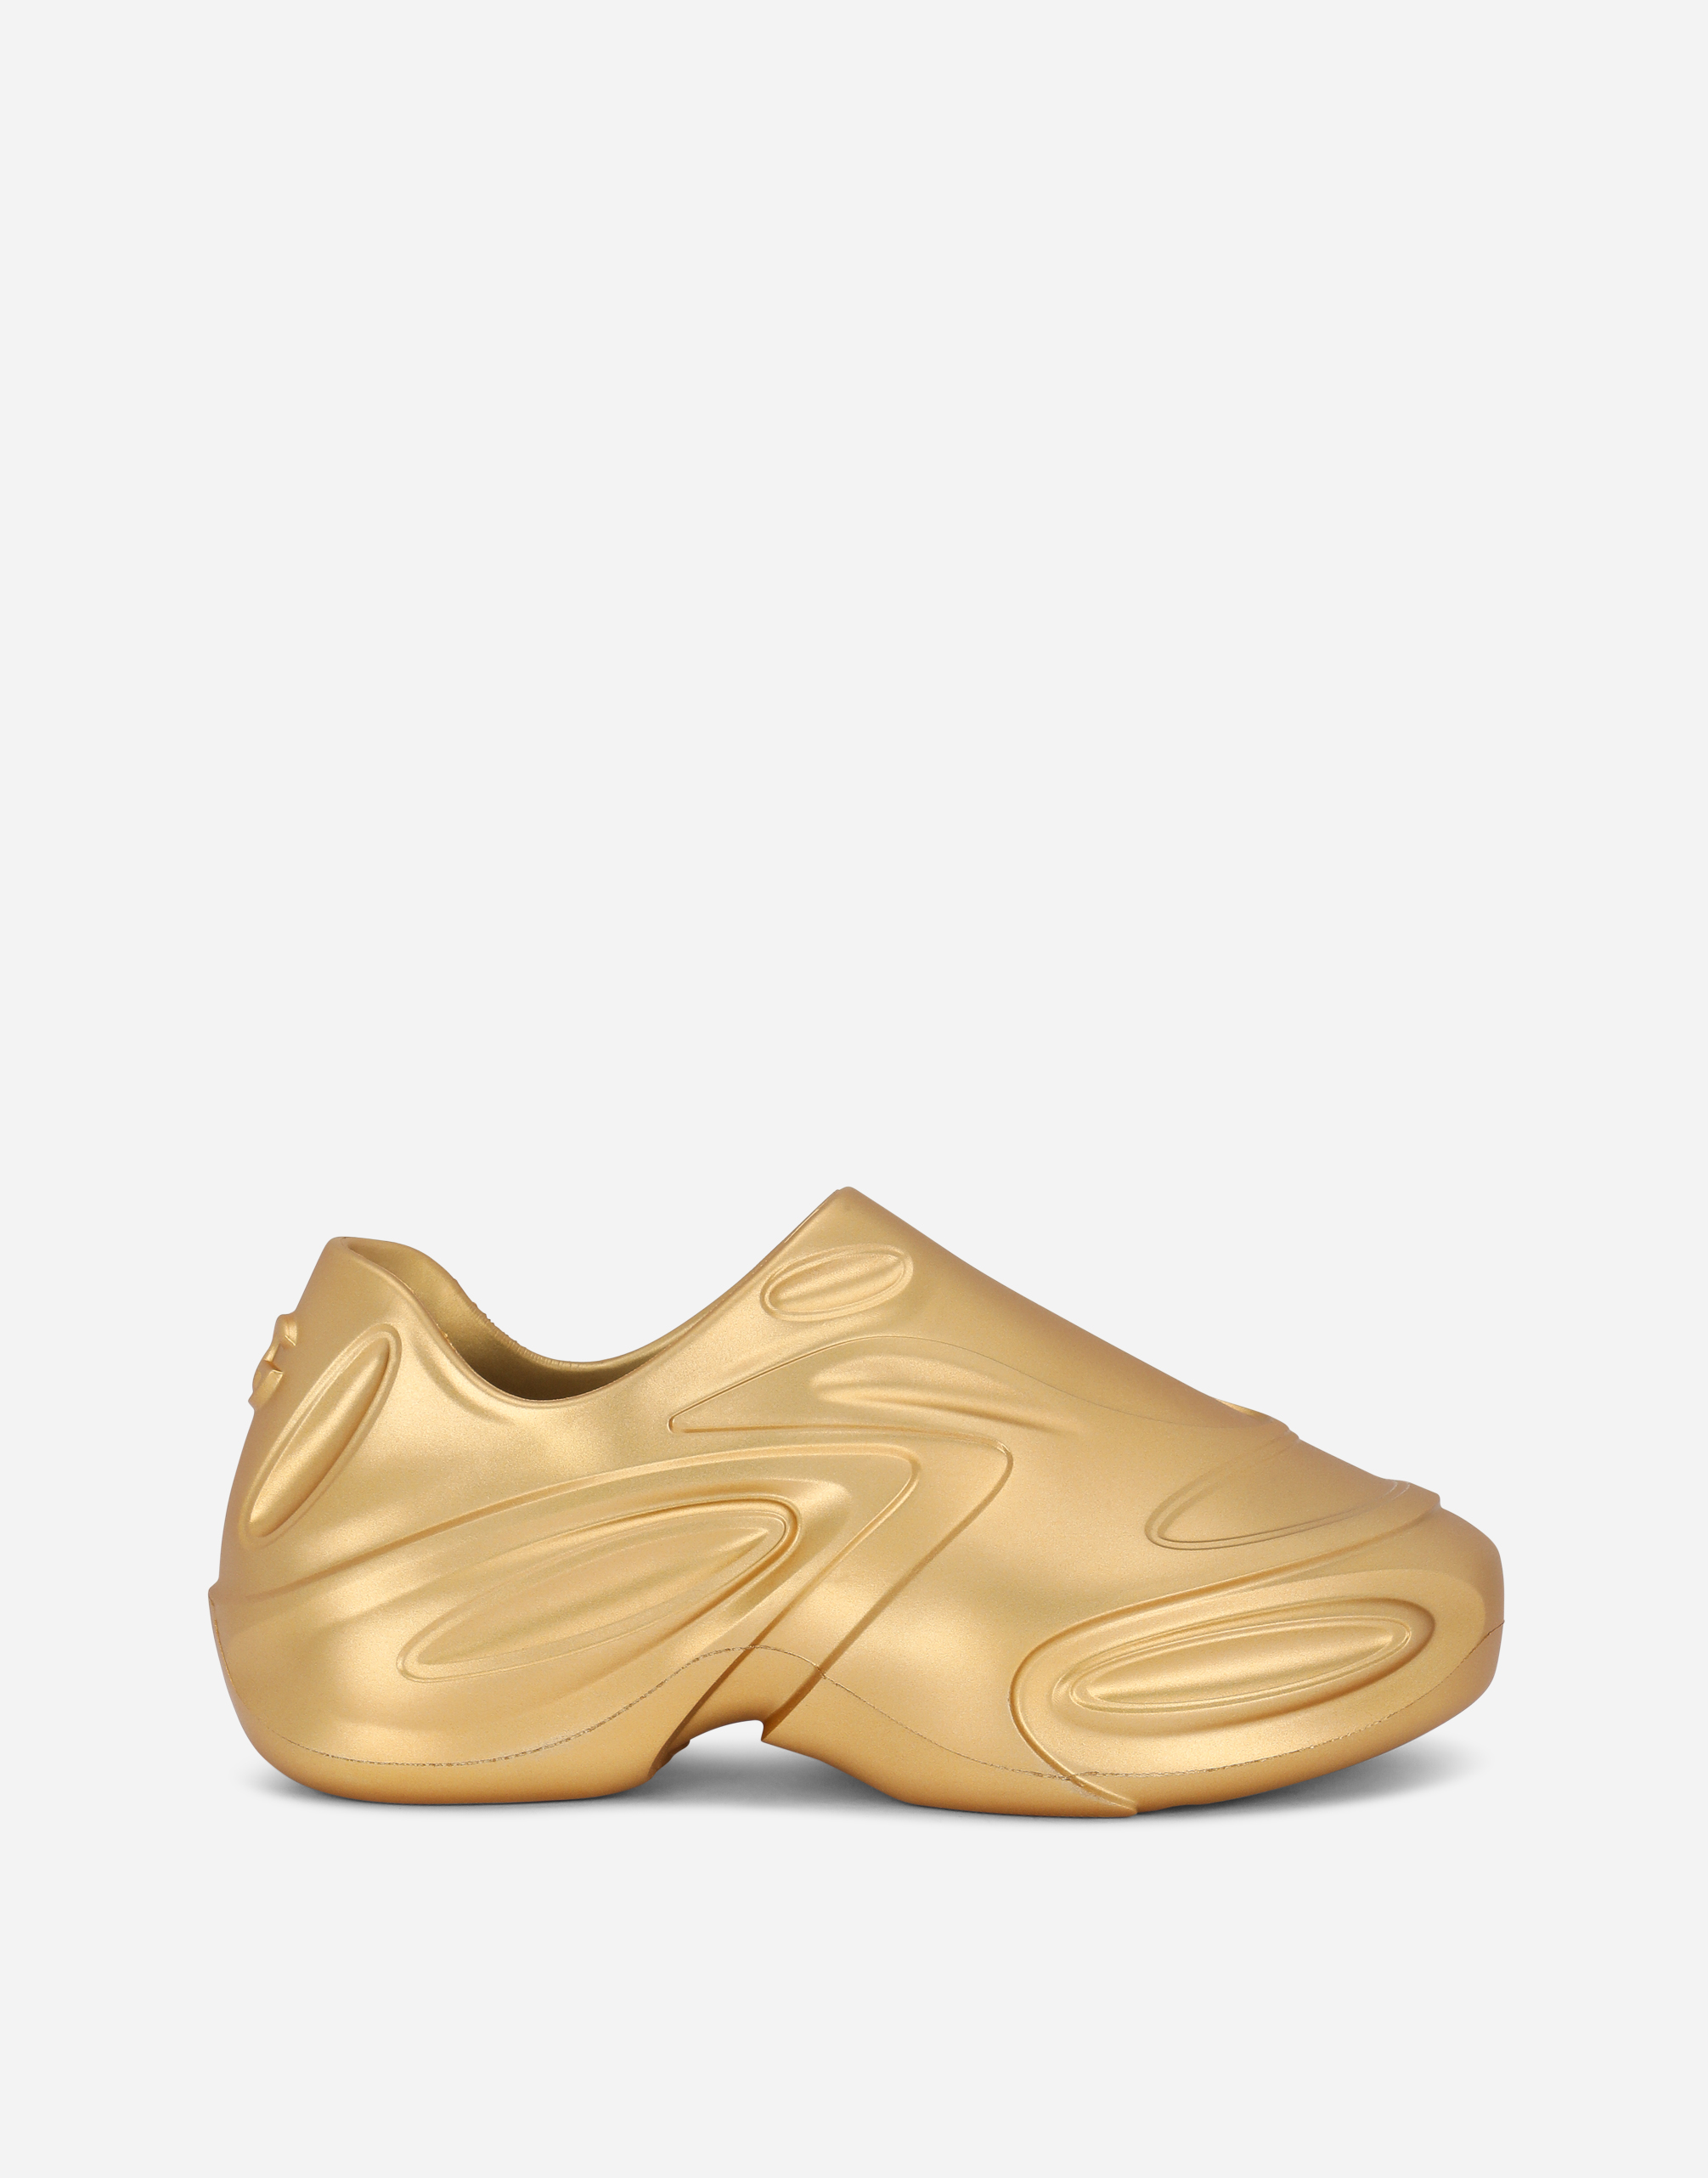 Foiled rubber Toy sneakers in Gold